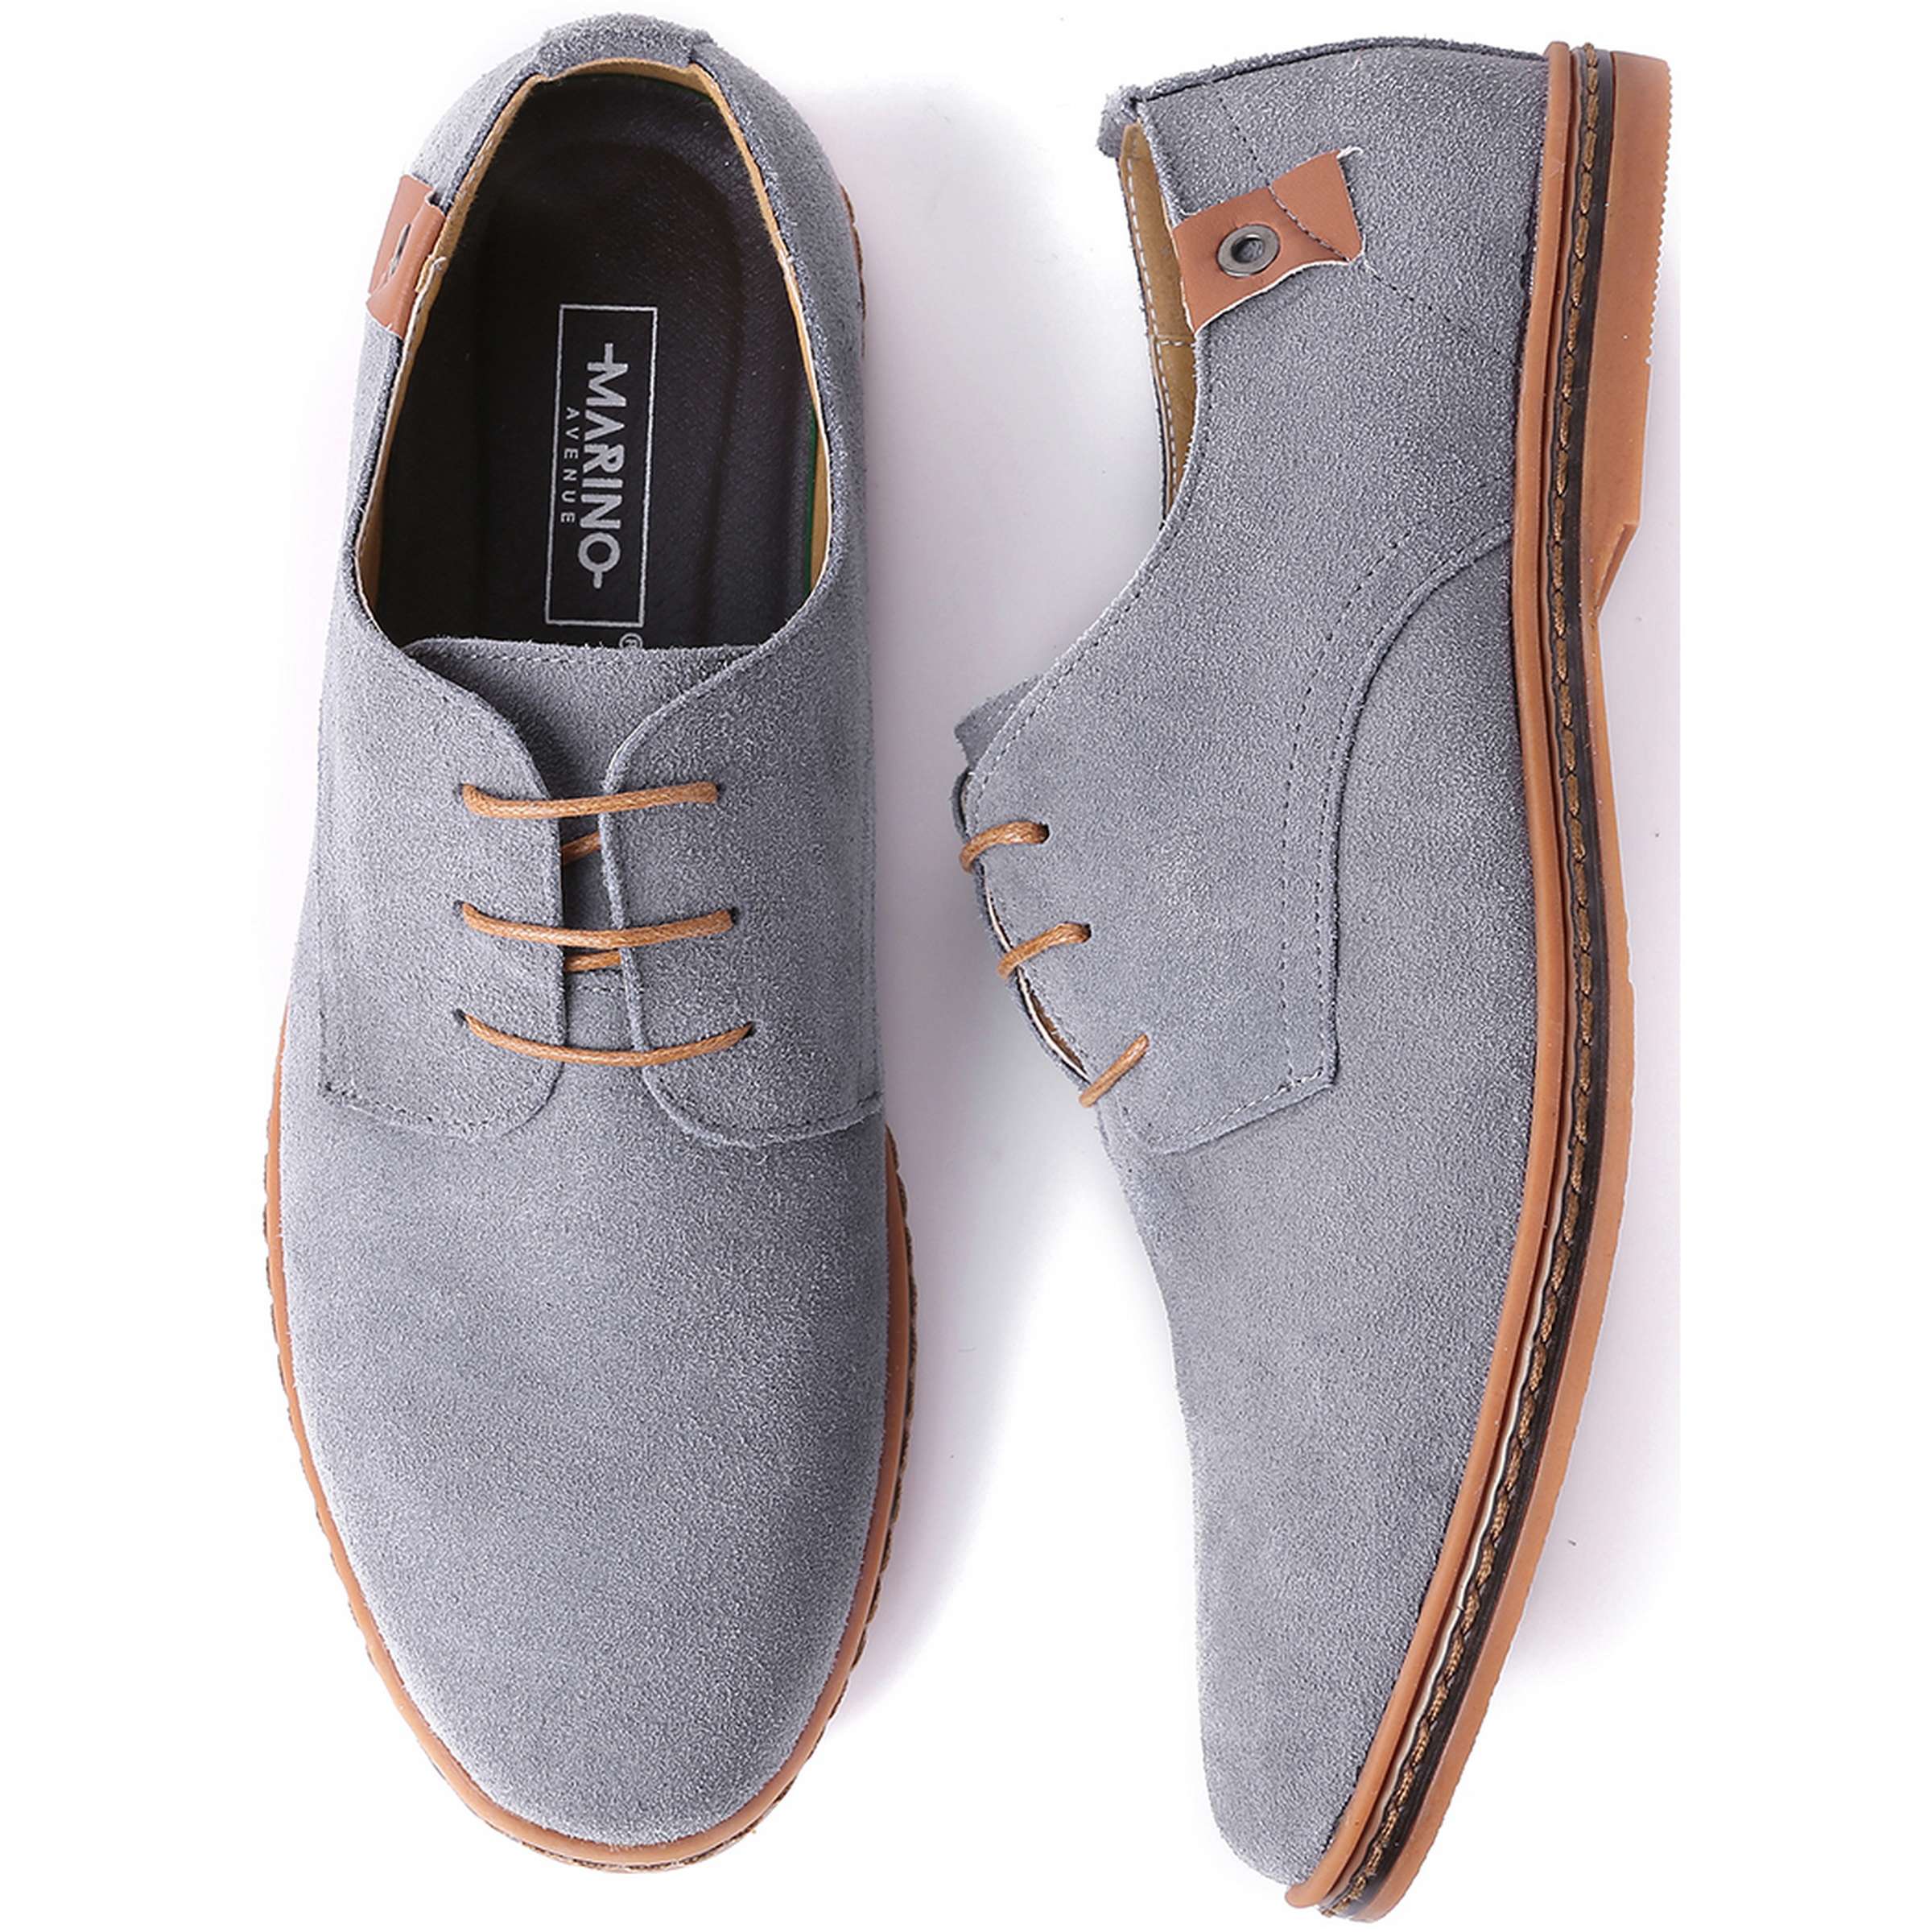 Mio Marino Classic Suede Oxford Shoes